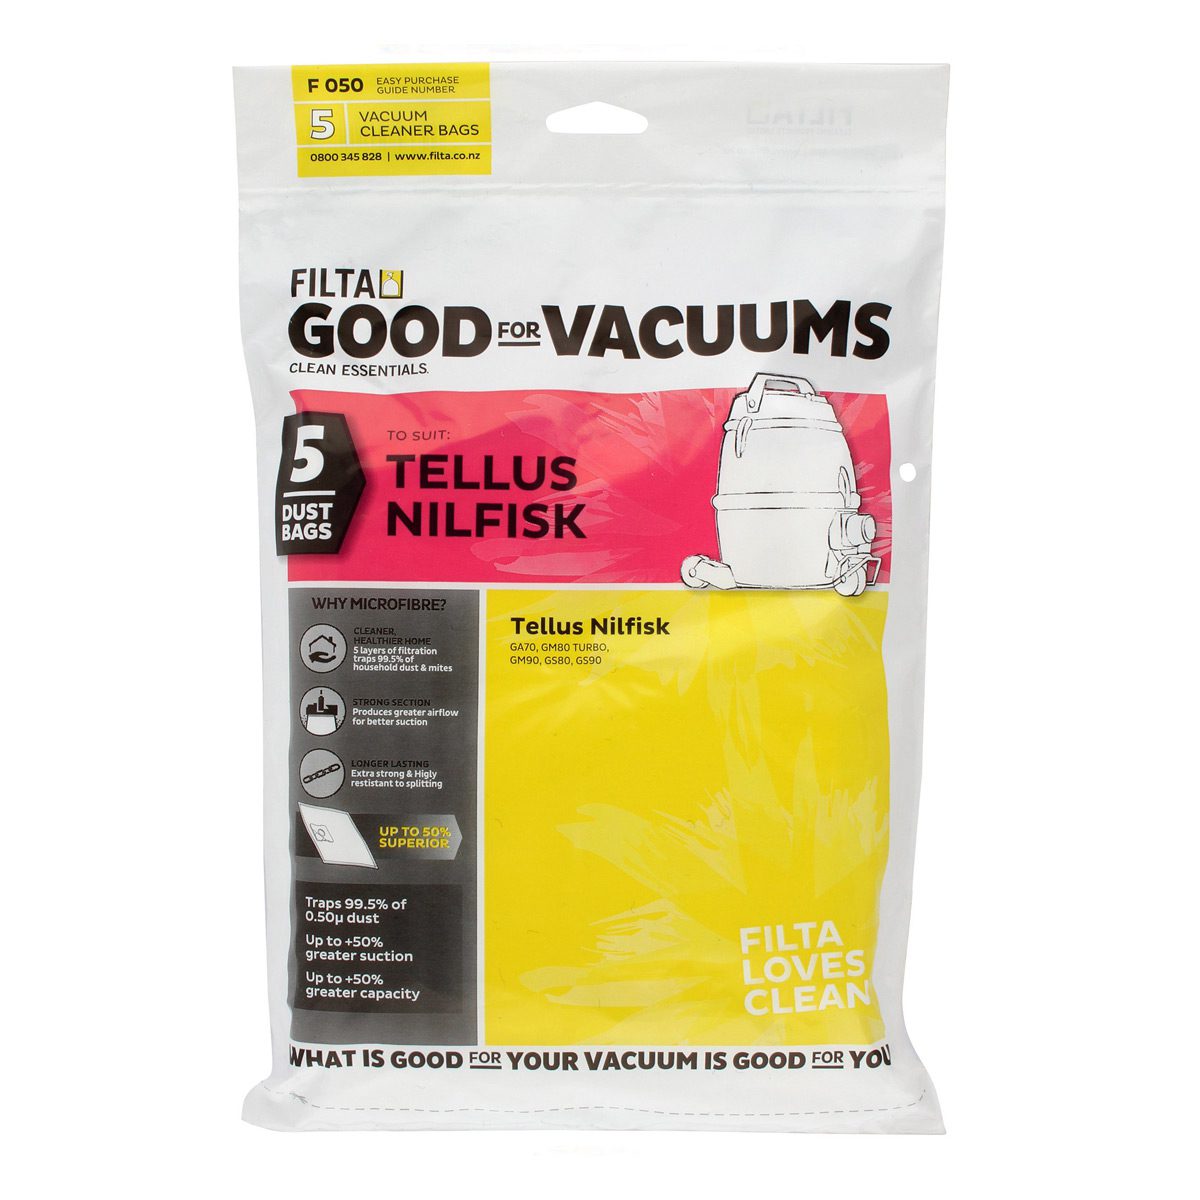 machinery-matting-vac-bags-tellus-nilfisk-vacuum-bags-5-pack-SMS-multi-layered-technology-provides-superior-dust-capture-keeping-your-home-or-office-clean-vjs-2-distributors-50011